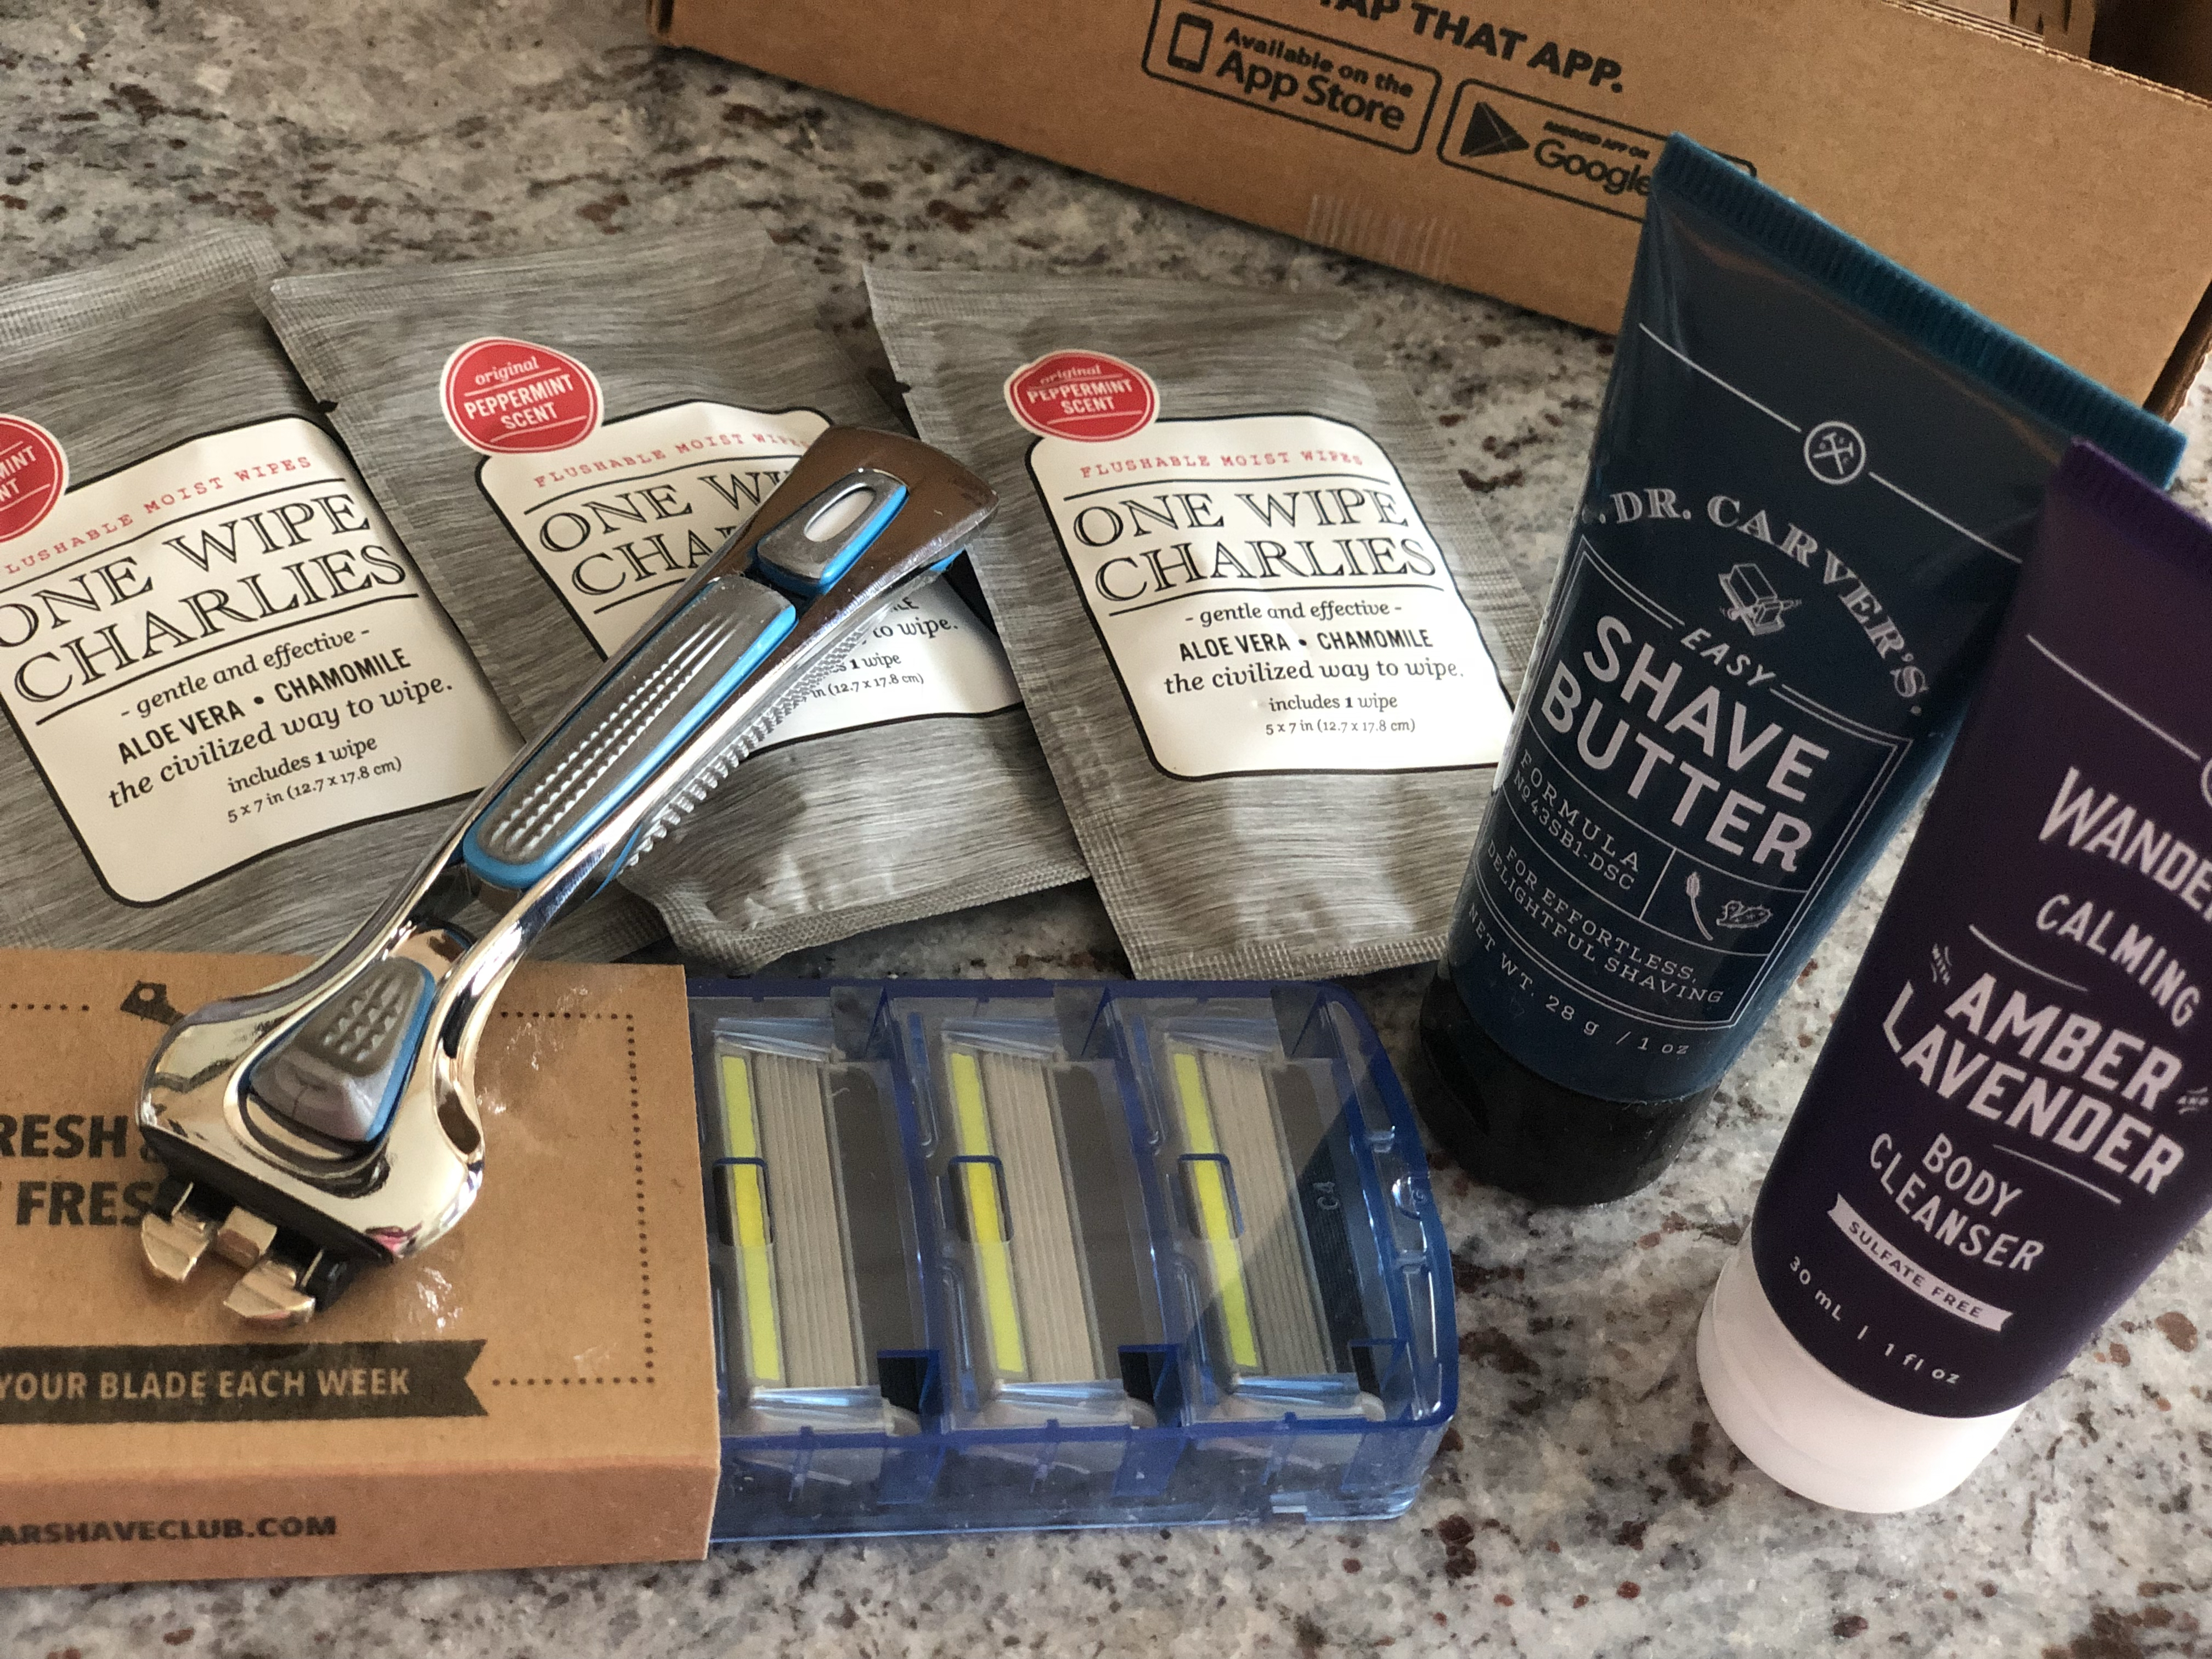 https://hip2save.com/wp-content/uploads/2018/03/dollar-shave-club-trial.jpg?resize=4032%2C3024&strip=all